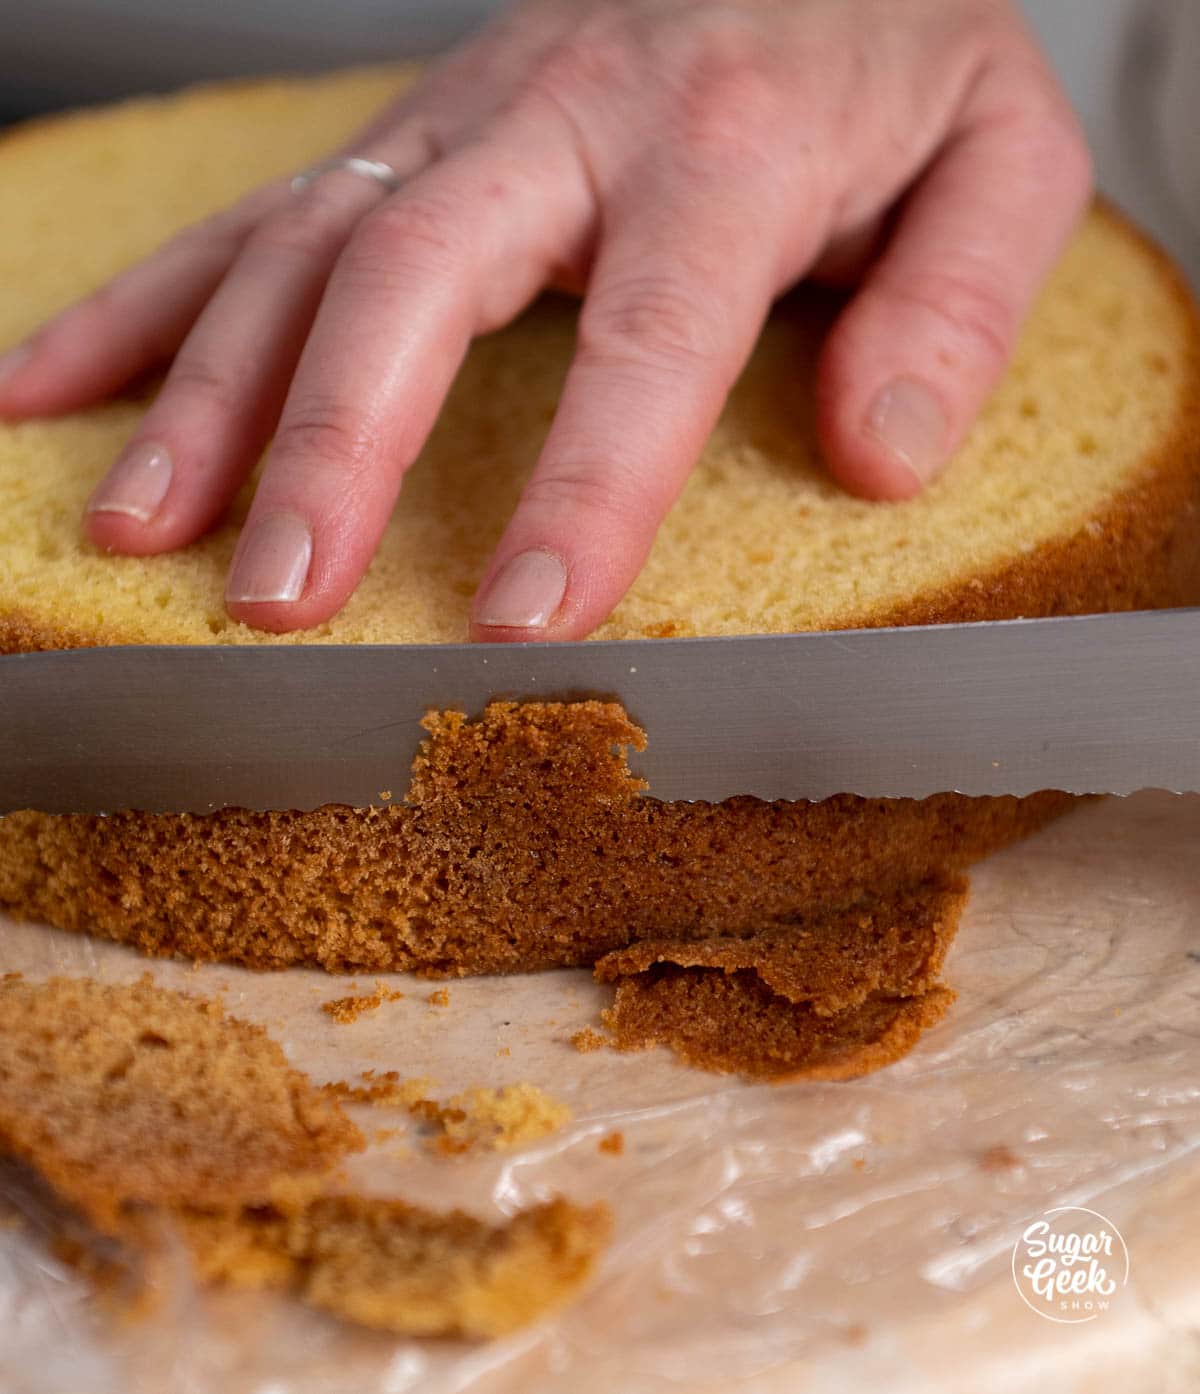 trimming the brown edges off of a cake